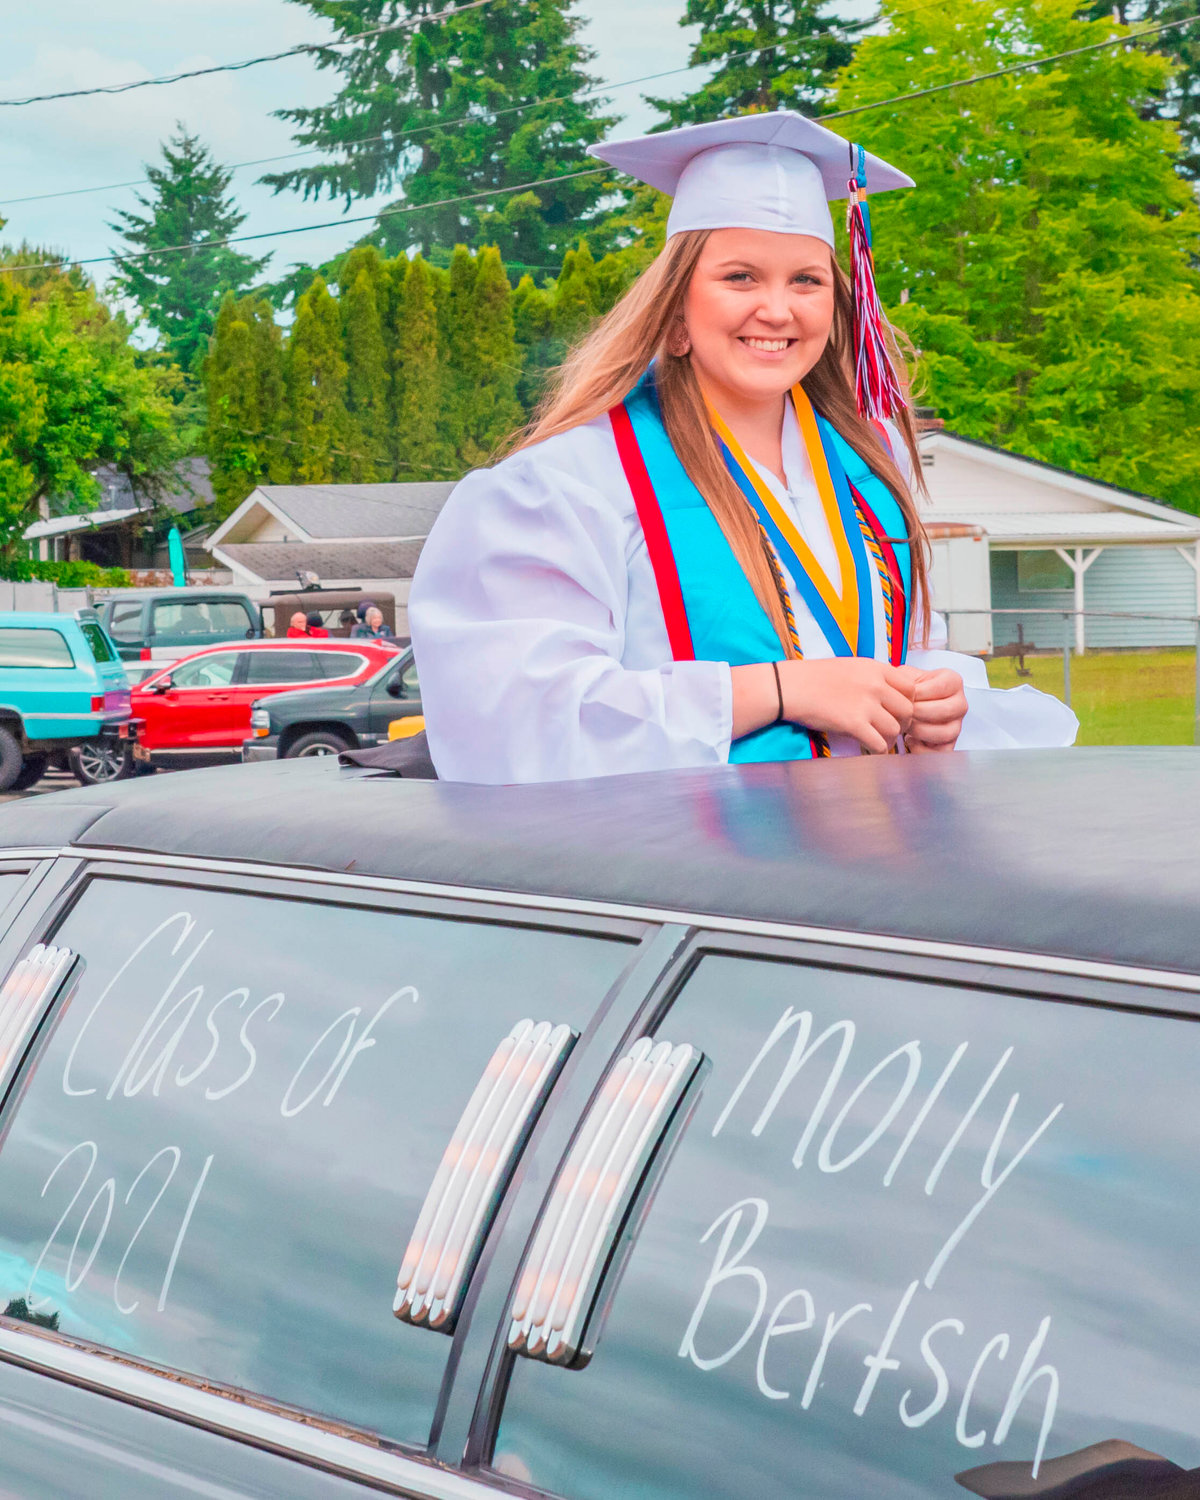 Molly Bertsch smiles out the sunroof of a limo during a graduation parade on Saturday in Tenino.